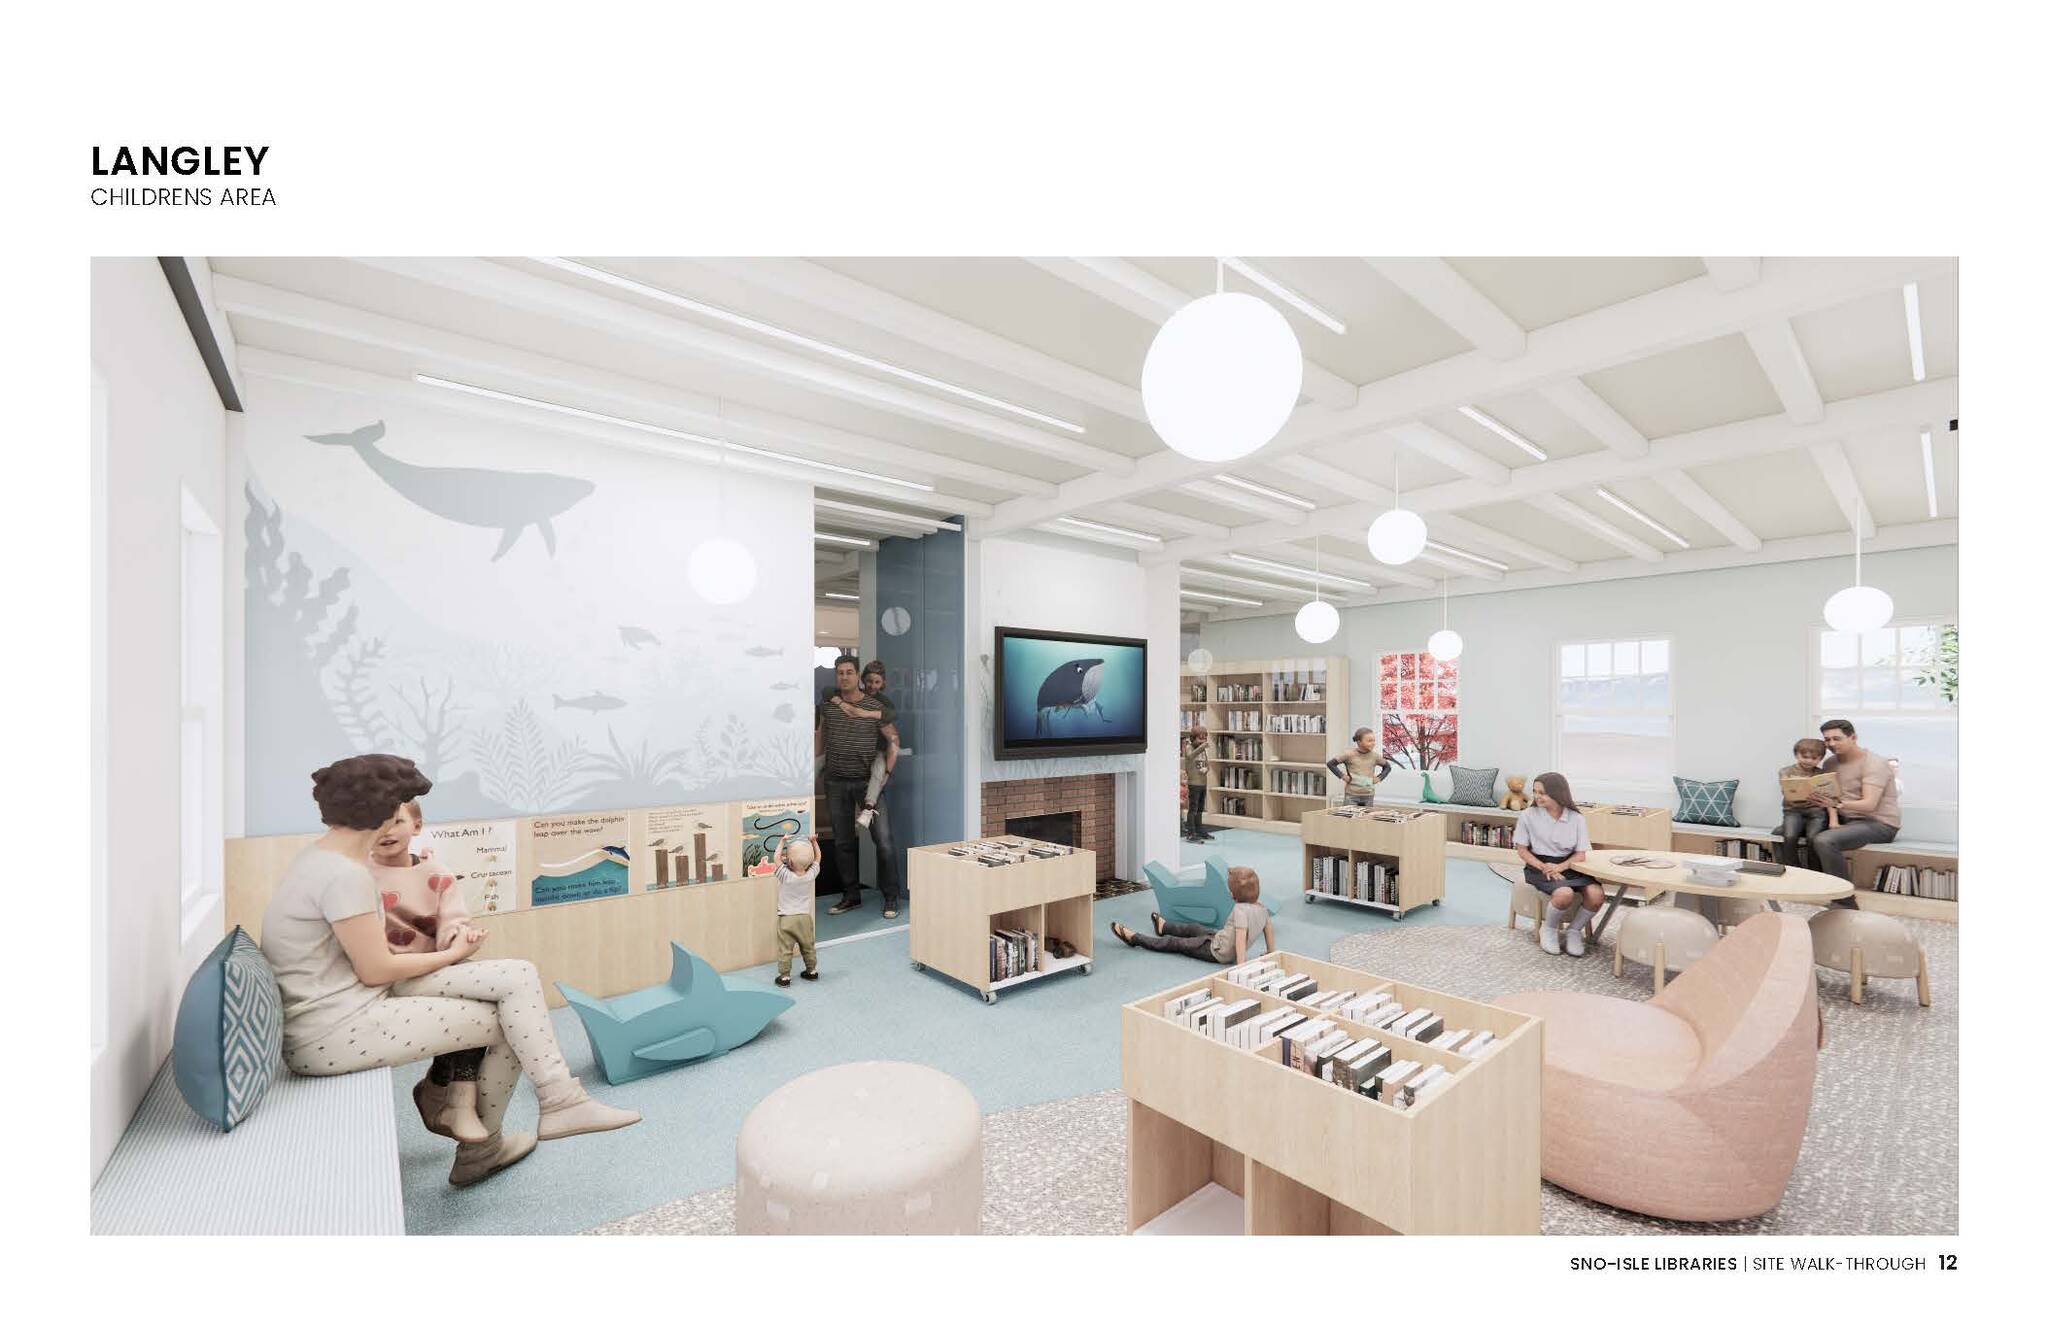 The newly updated Langley Library will have a more engaging children’s area. (Concept art provided)